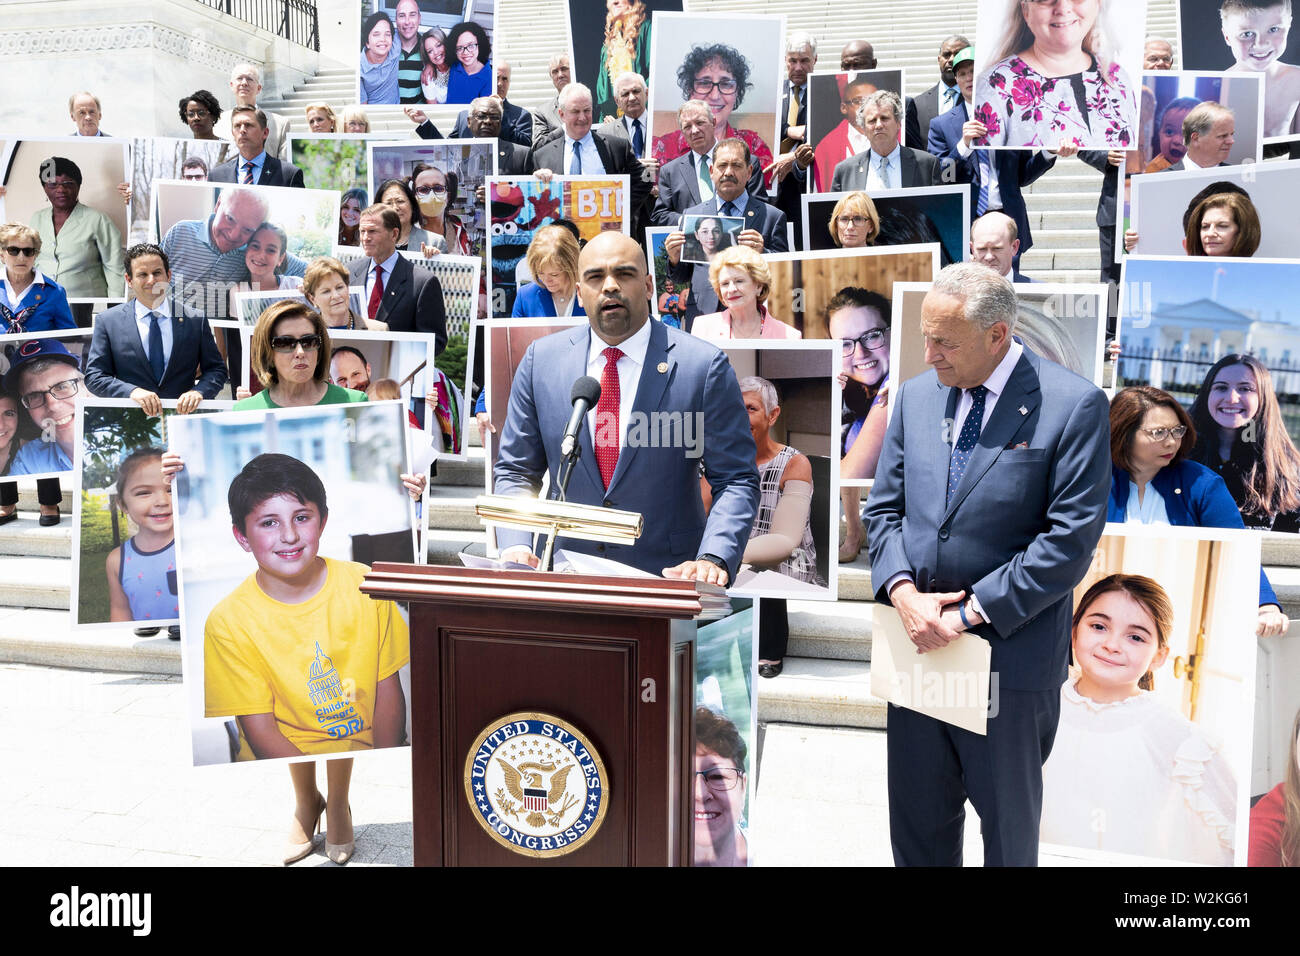 Washington, D.C, USA. 9th July, 2019. U.S. Representative MARC VEASEY (D-TX) in front of a group of Democratic Senators and Representatives on the steps of the U.S. Capitol speaking against the ''assault on protections for people with pre-existing conditions'', on the steps of the US Capitol in Washington, DC on July 9, 2019. Credit: Michael Brochstein/ZUMA Wire/Alamy Live News Stock Photo